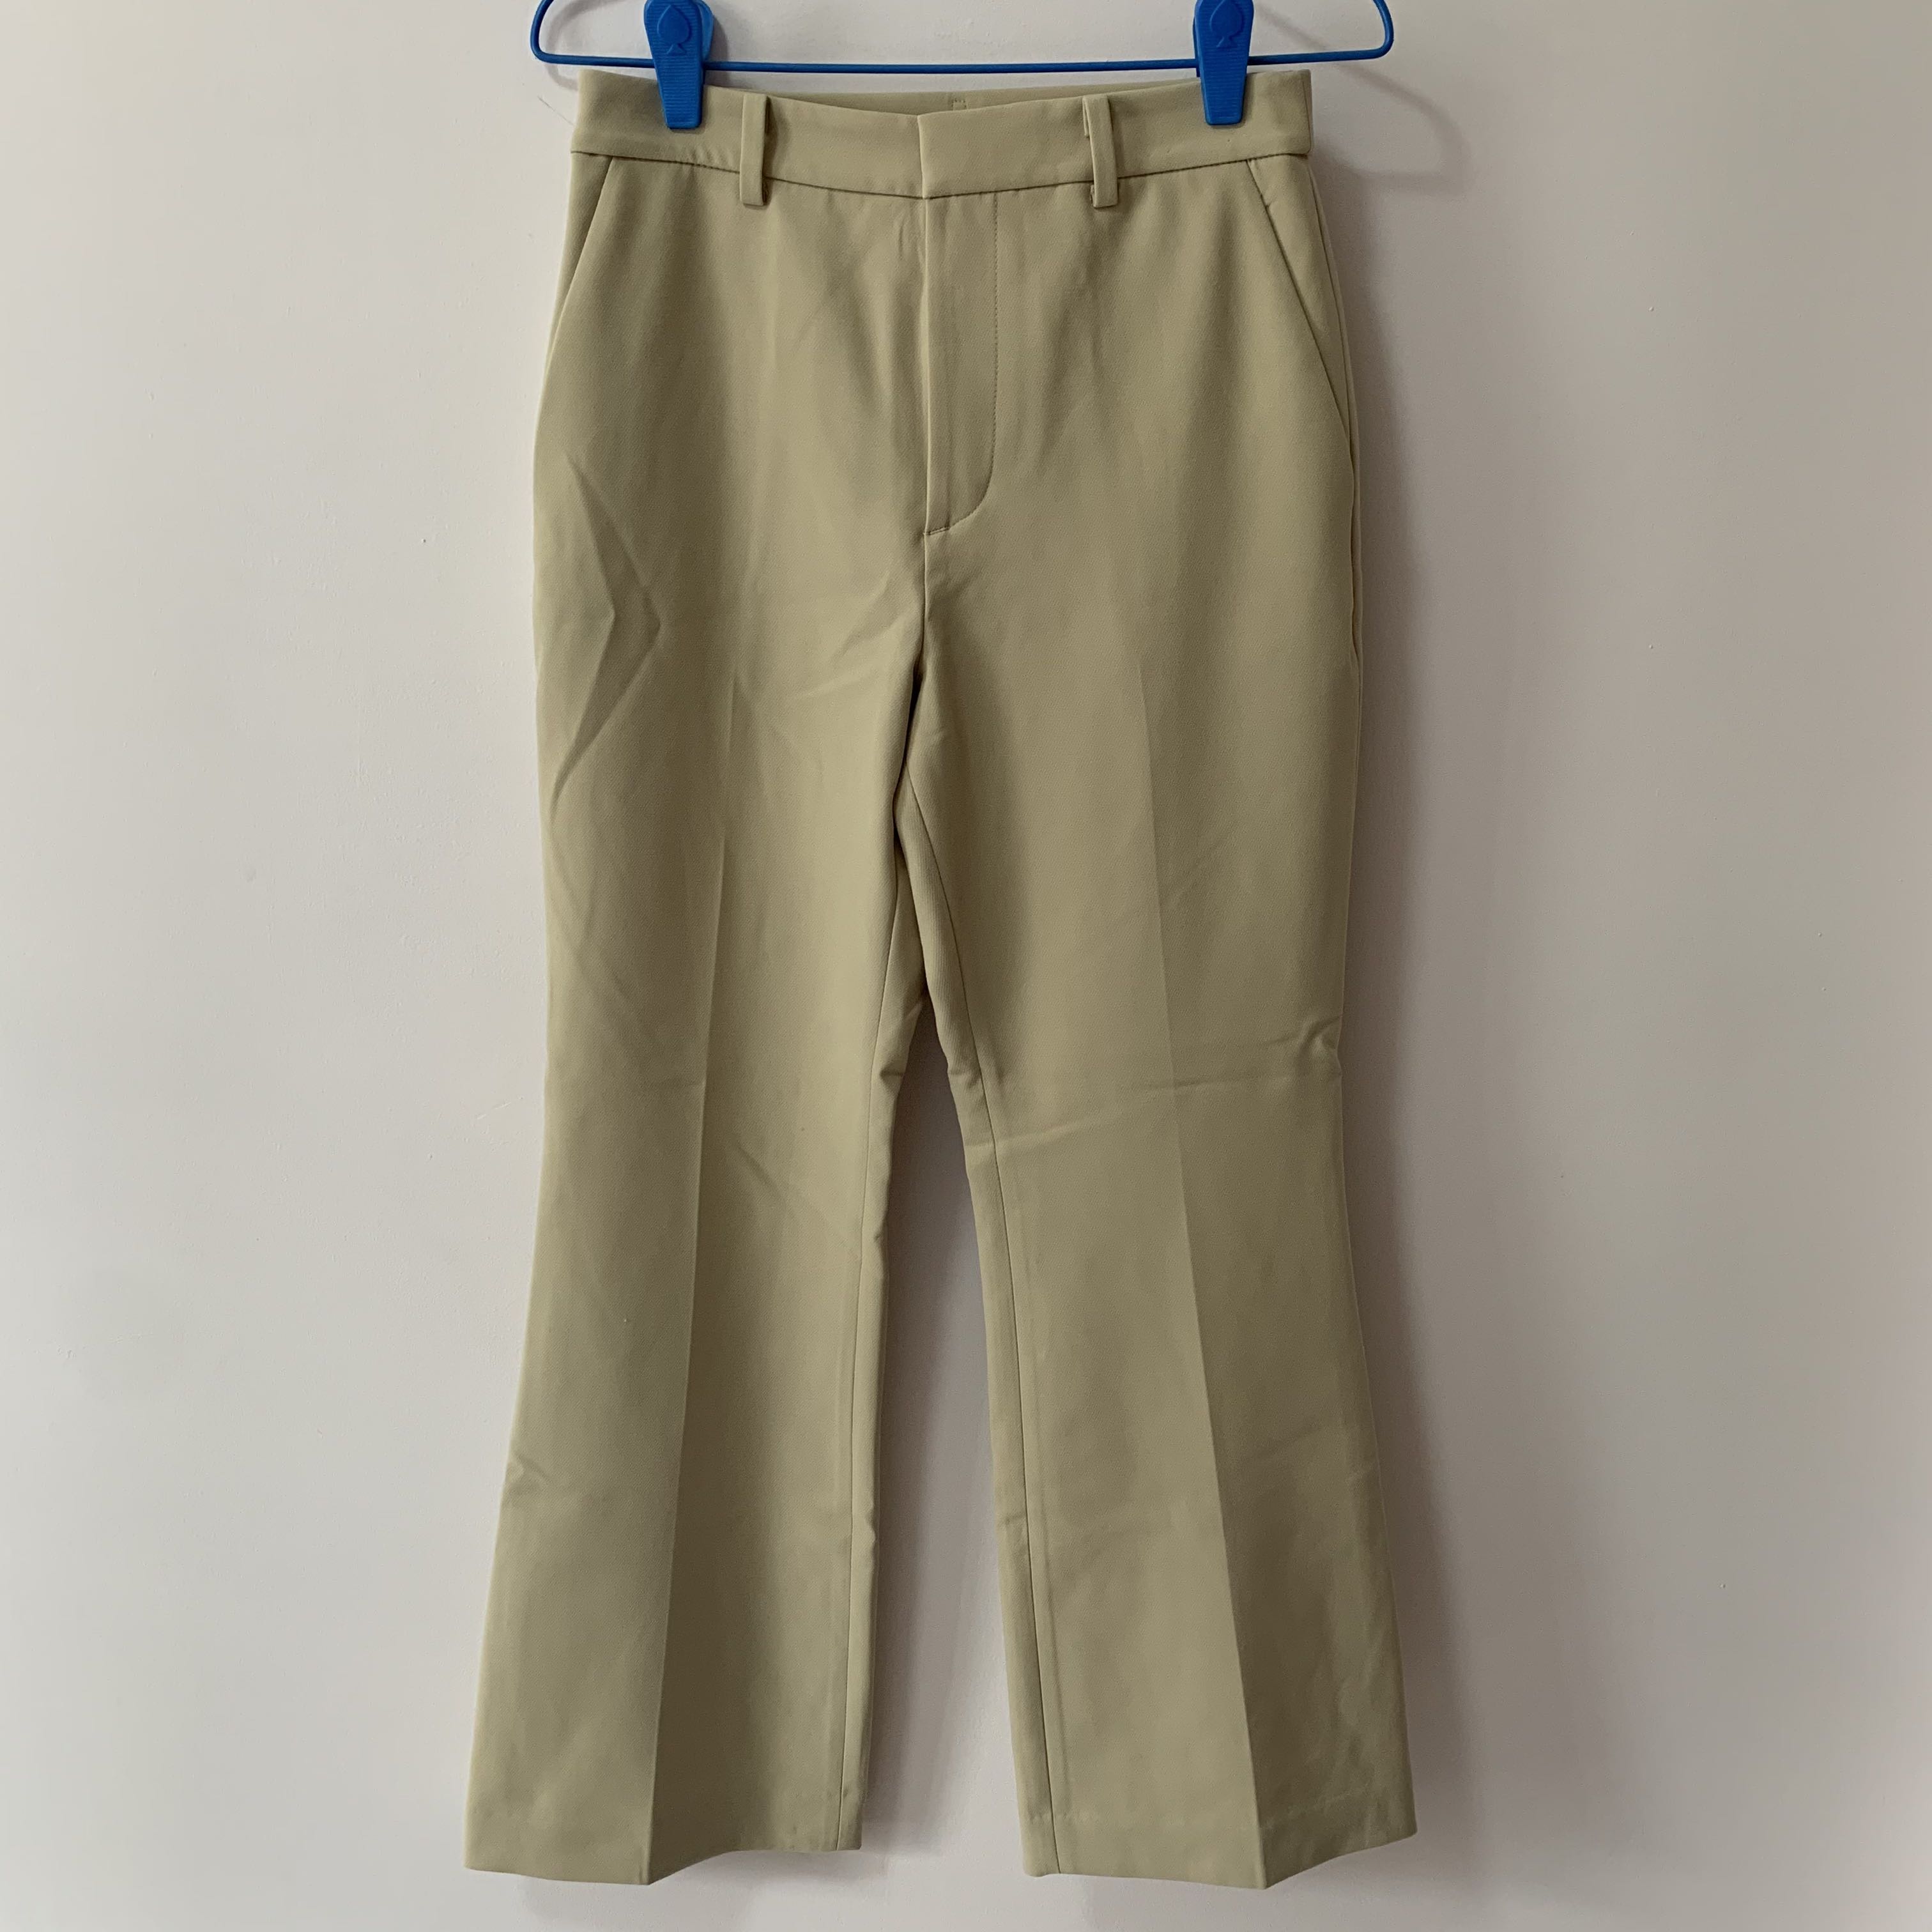 Uniqlo EZY Flare Ankle Pants (2Way Stretch), Women's Fashion, Bottoms ...